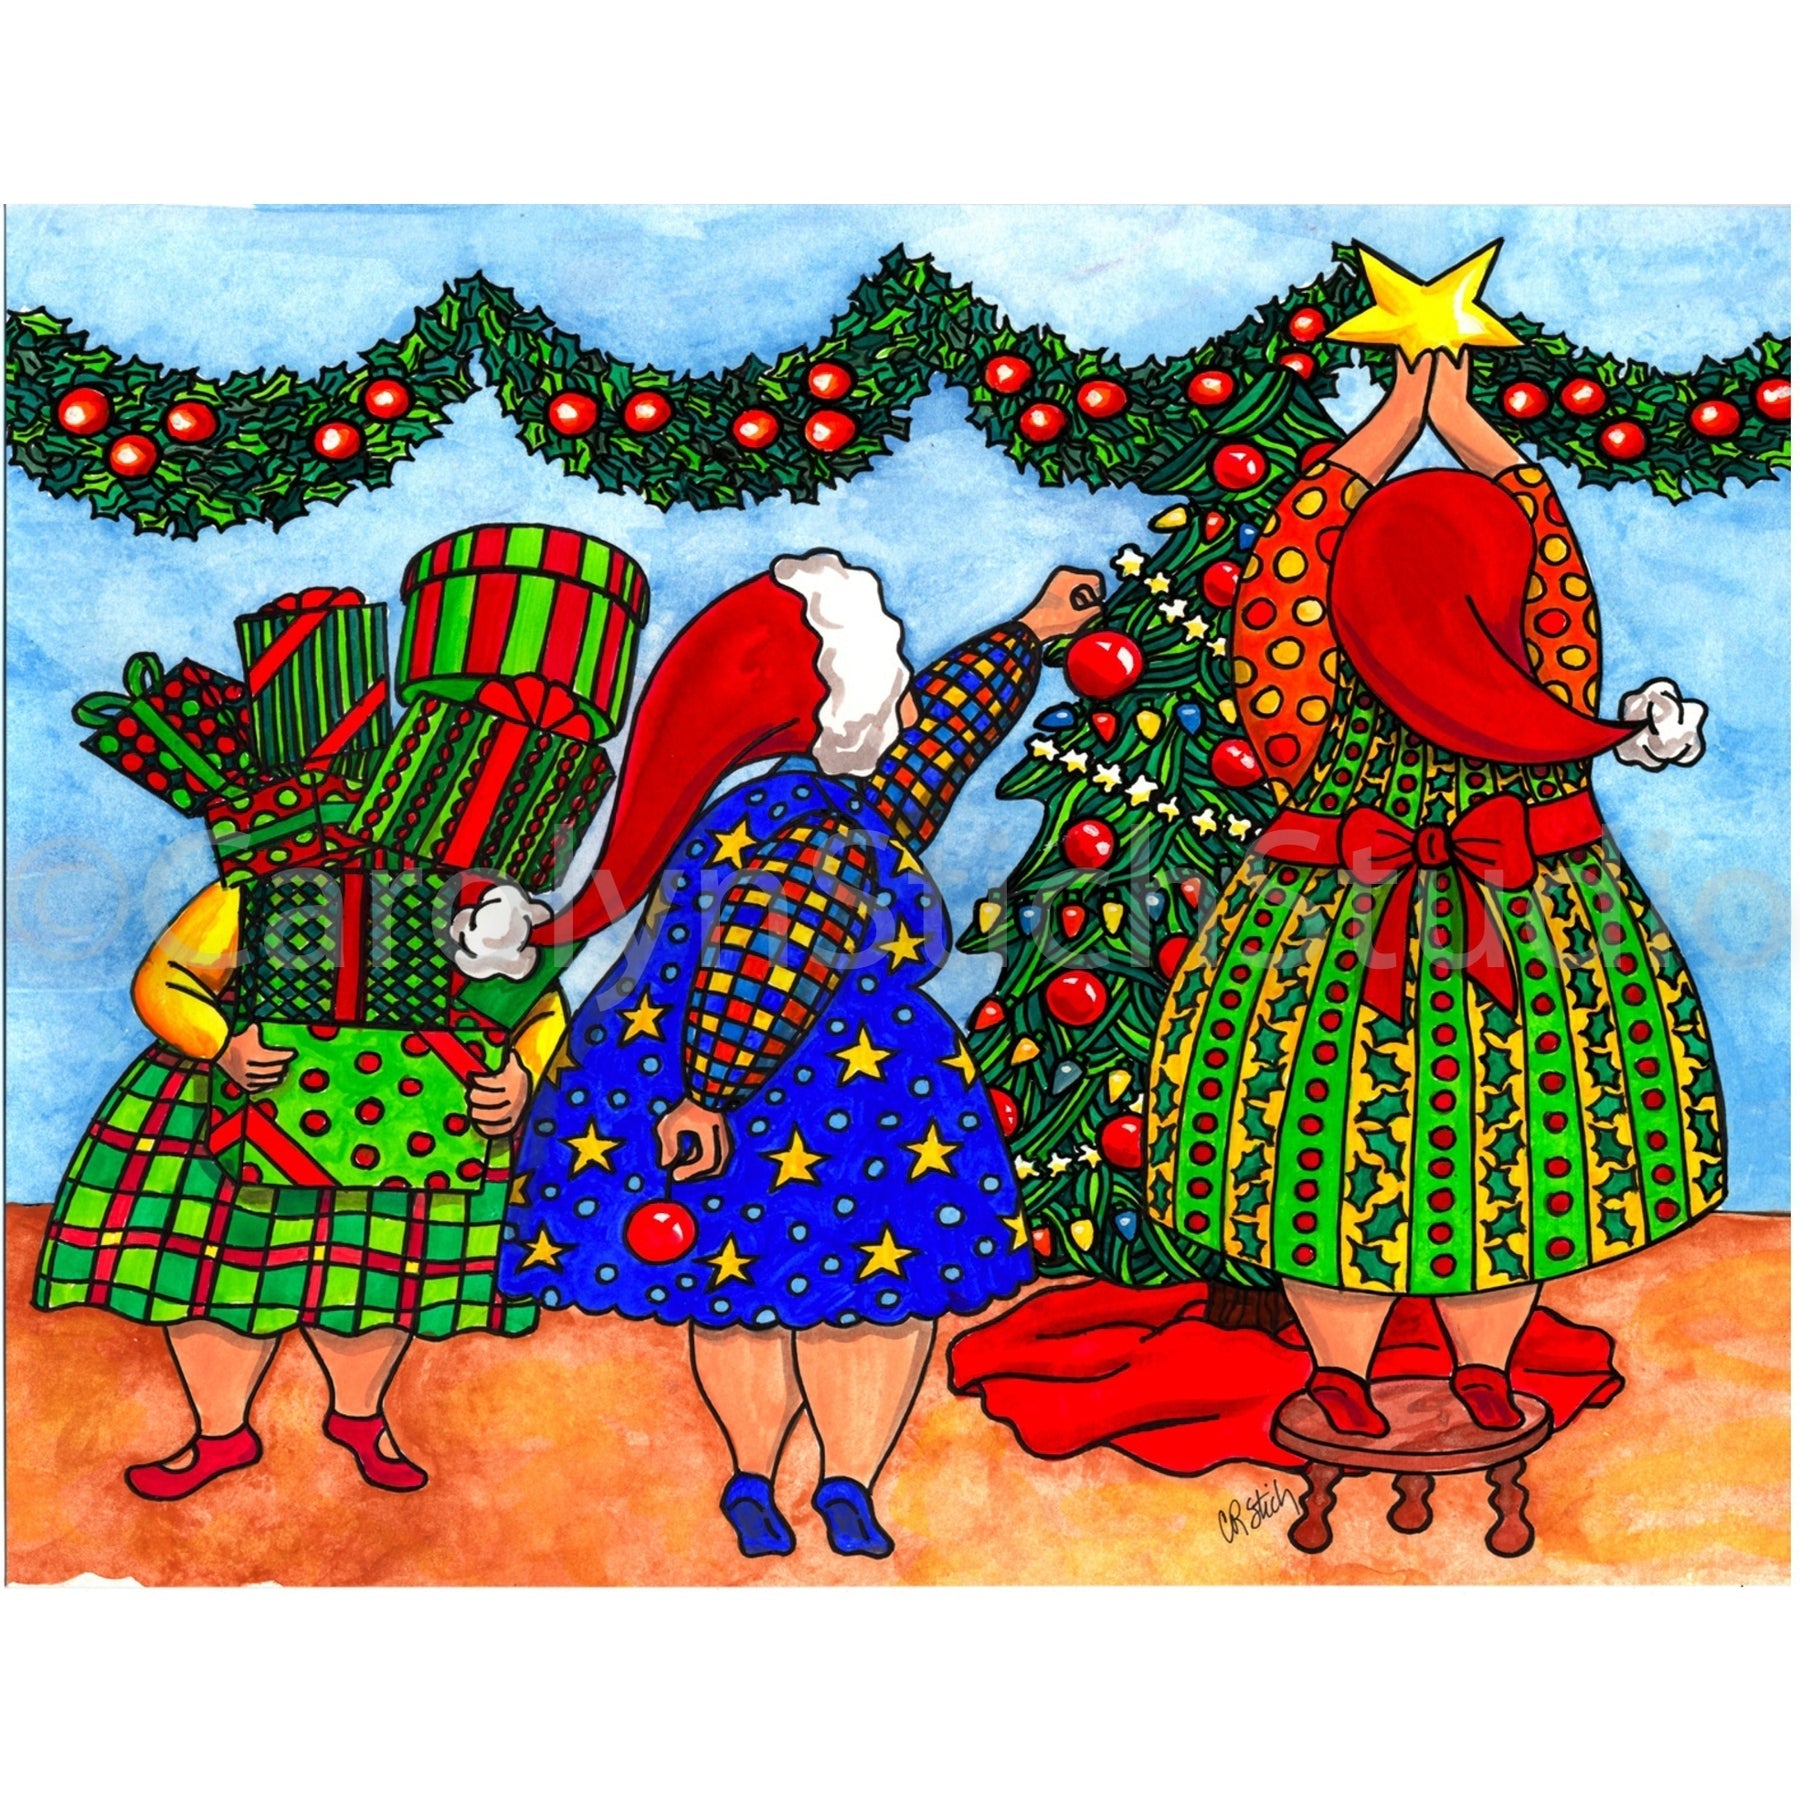 The Girls Wishing You Happy Holidays, rug hooking pattern